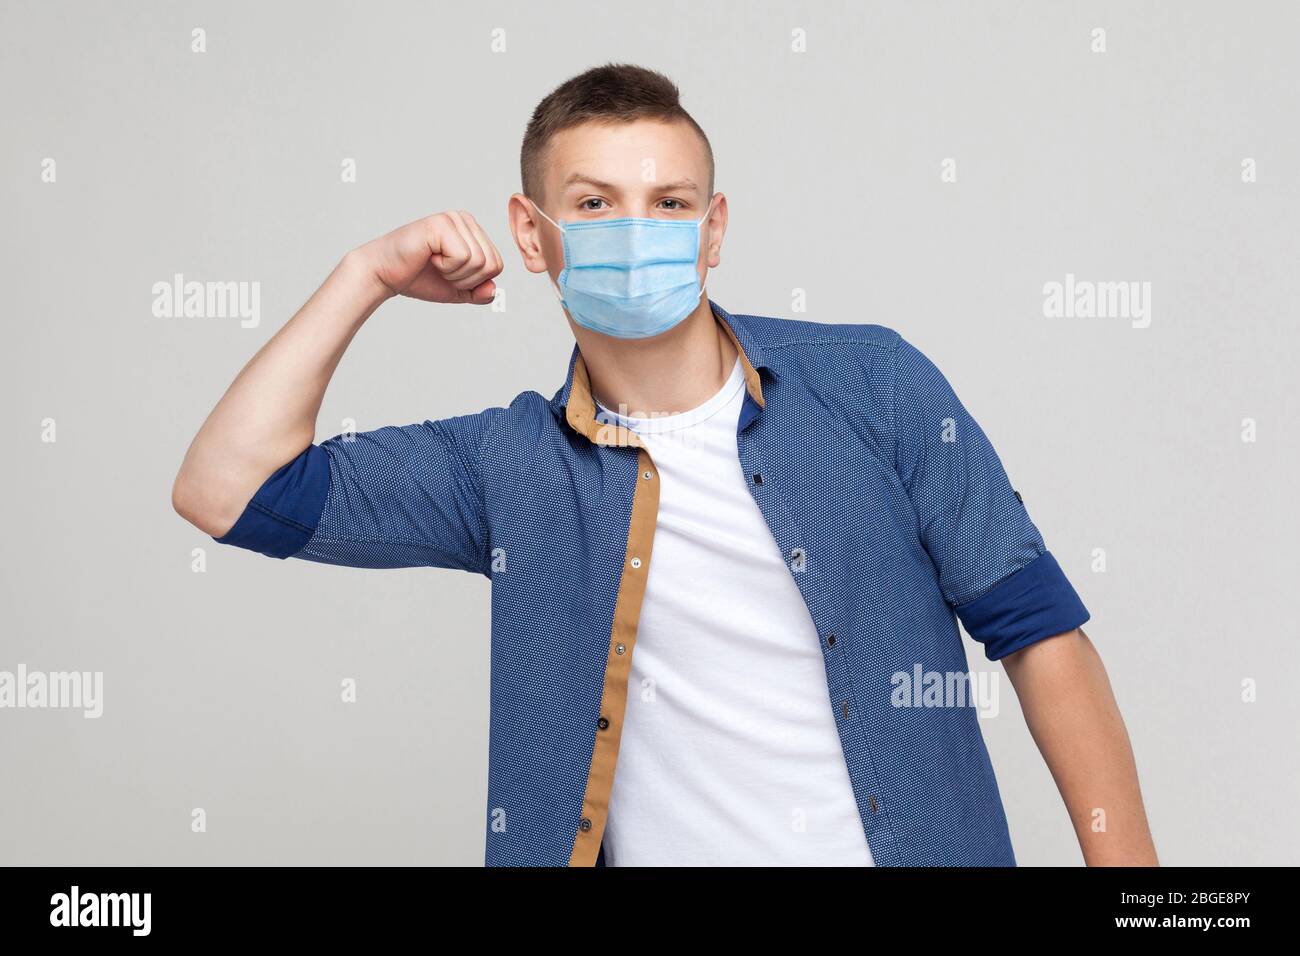 I am strong. Portrait of haughty young man in casual style with surgical medical mask standing with raised arms and looking at camera with proud face. Stock Photo